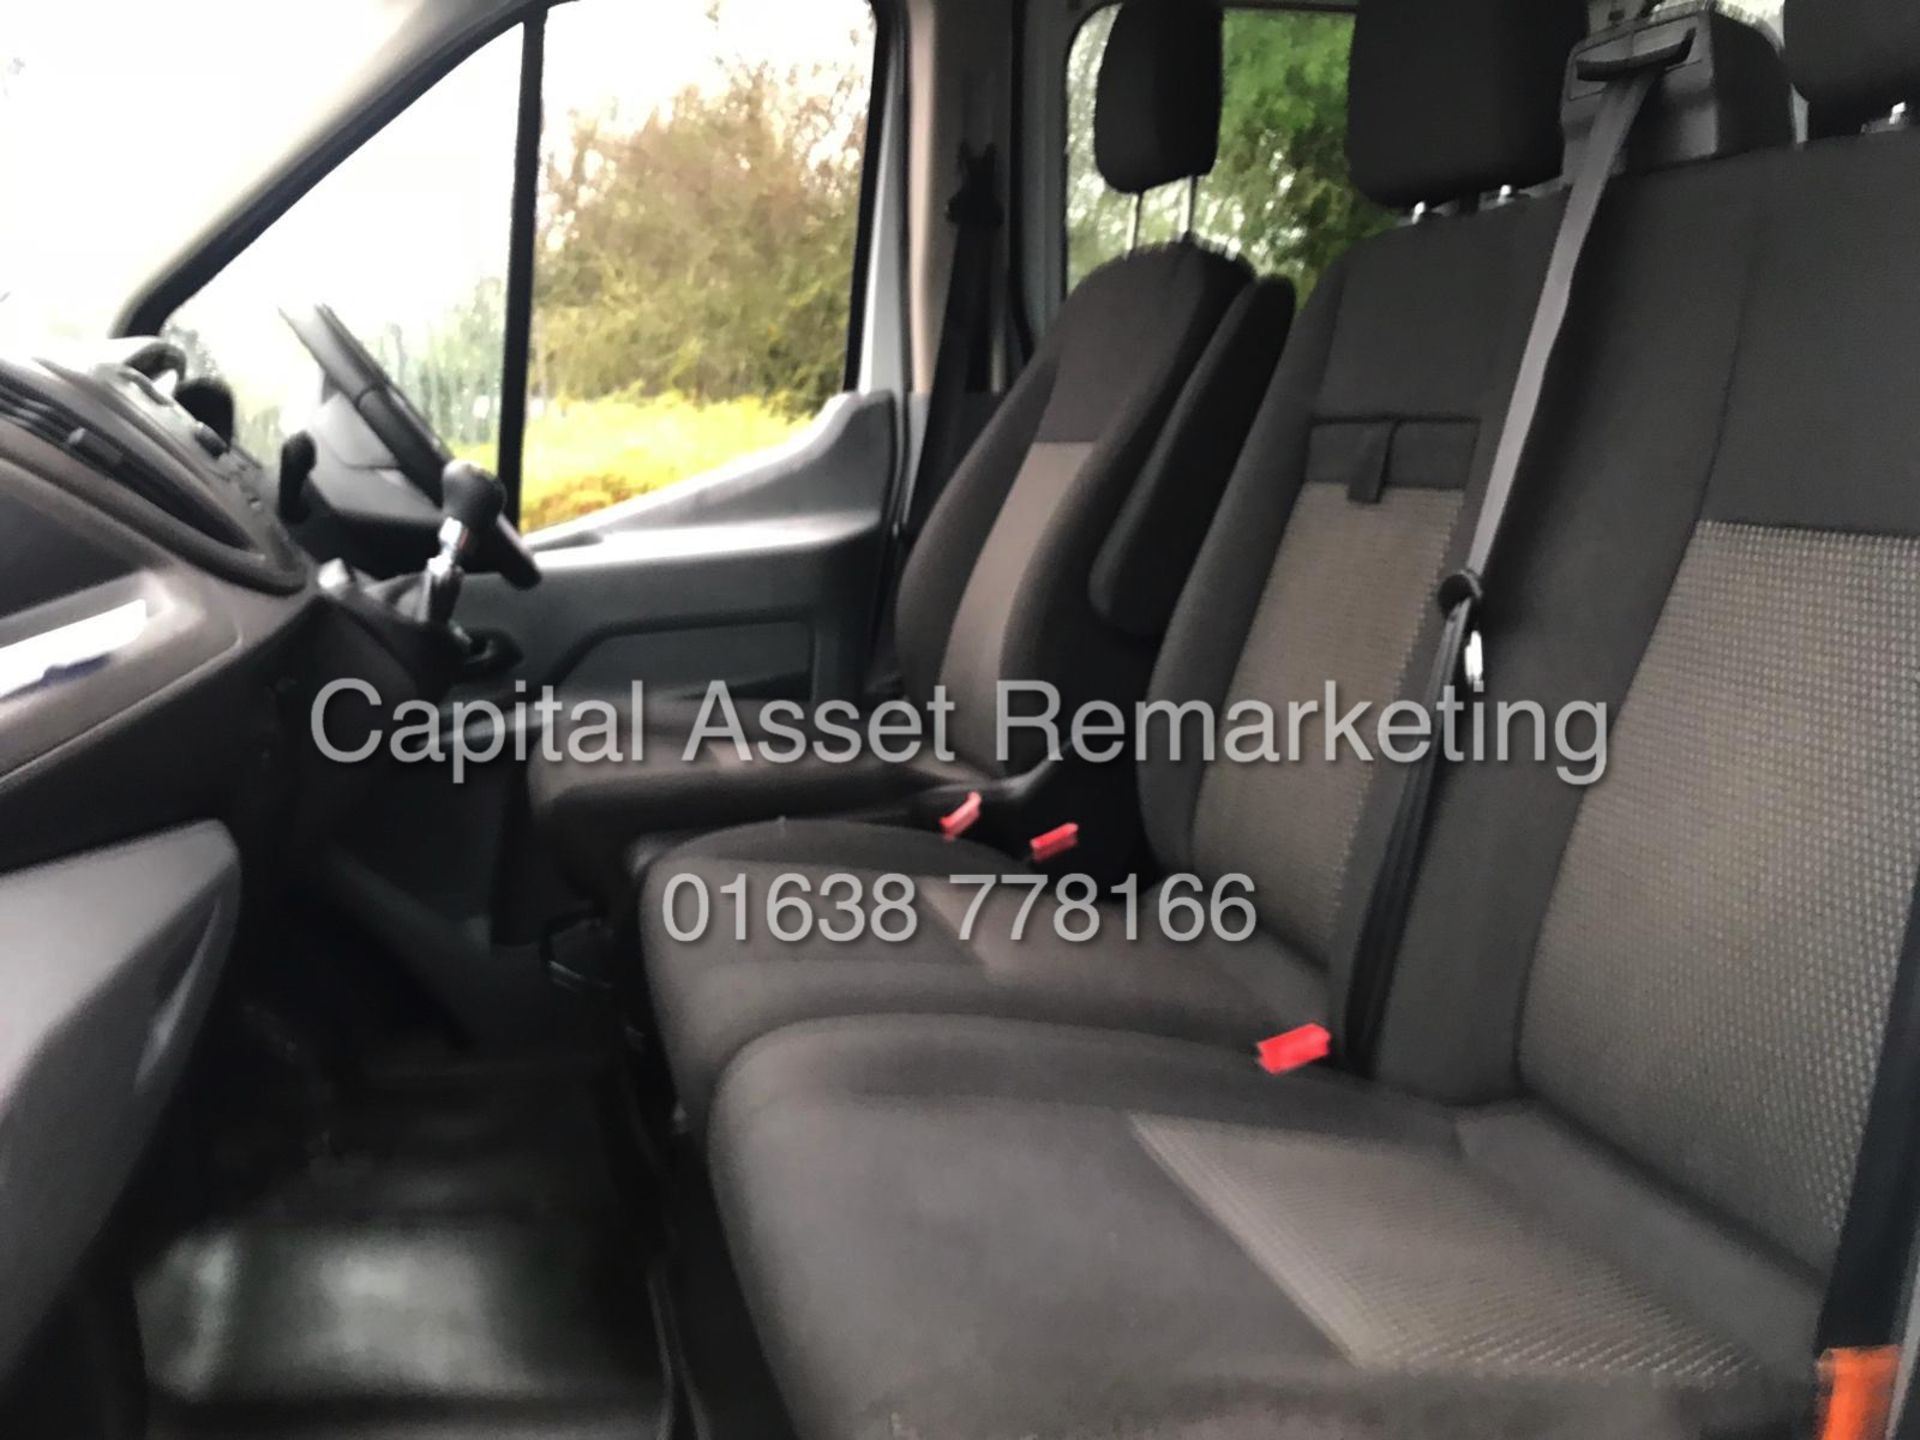 FORD TRANSIT 2.2TDCI "125" T350 D/C TIPPER (16 REG - NEW SHAPE) 1 OWNER ONLY 54K FROM NEW - Image 11 of 17